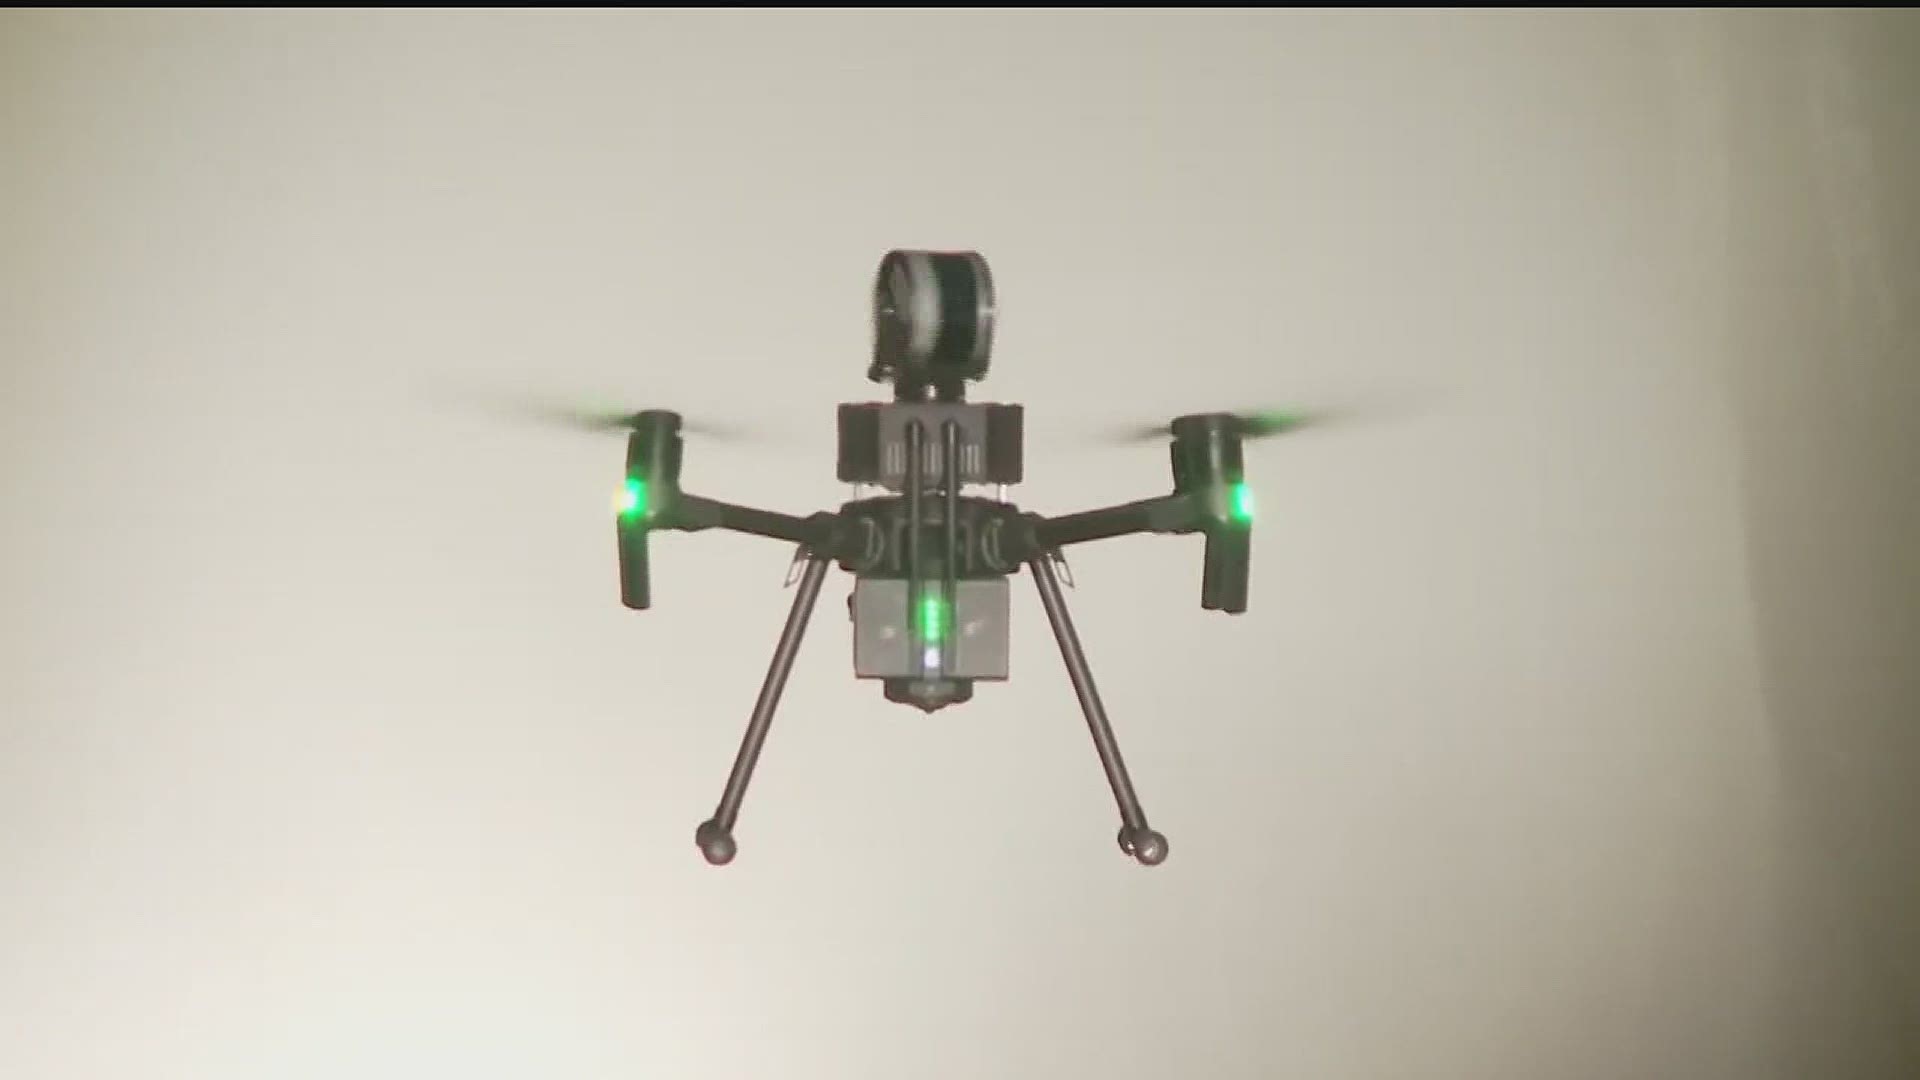 Hoping to find new ways to fight the virus, drones are being tests as an option.